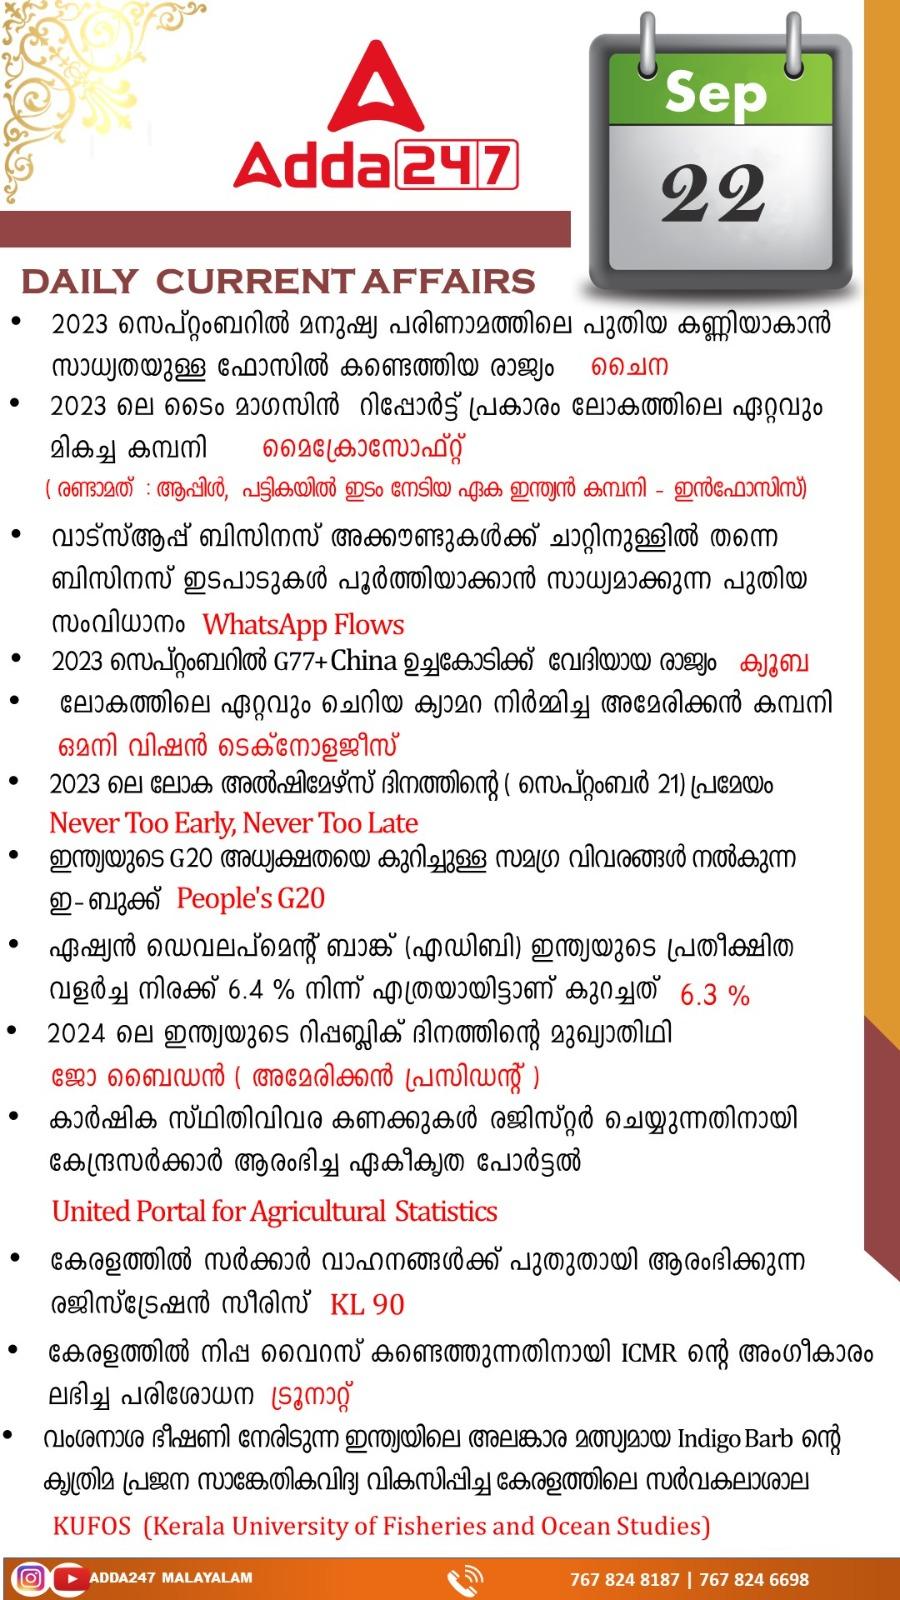 Daily Current Affairs in Malayalam-22nd September